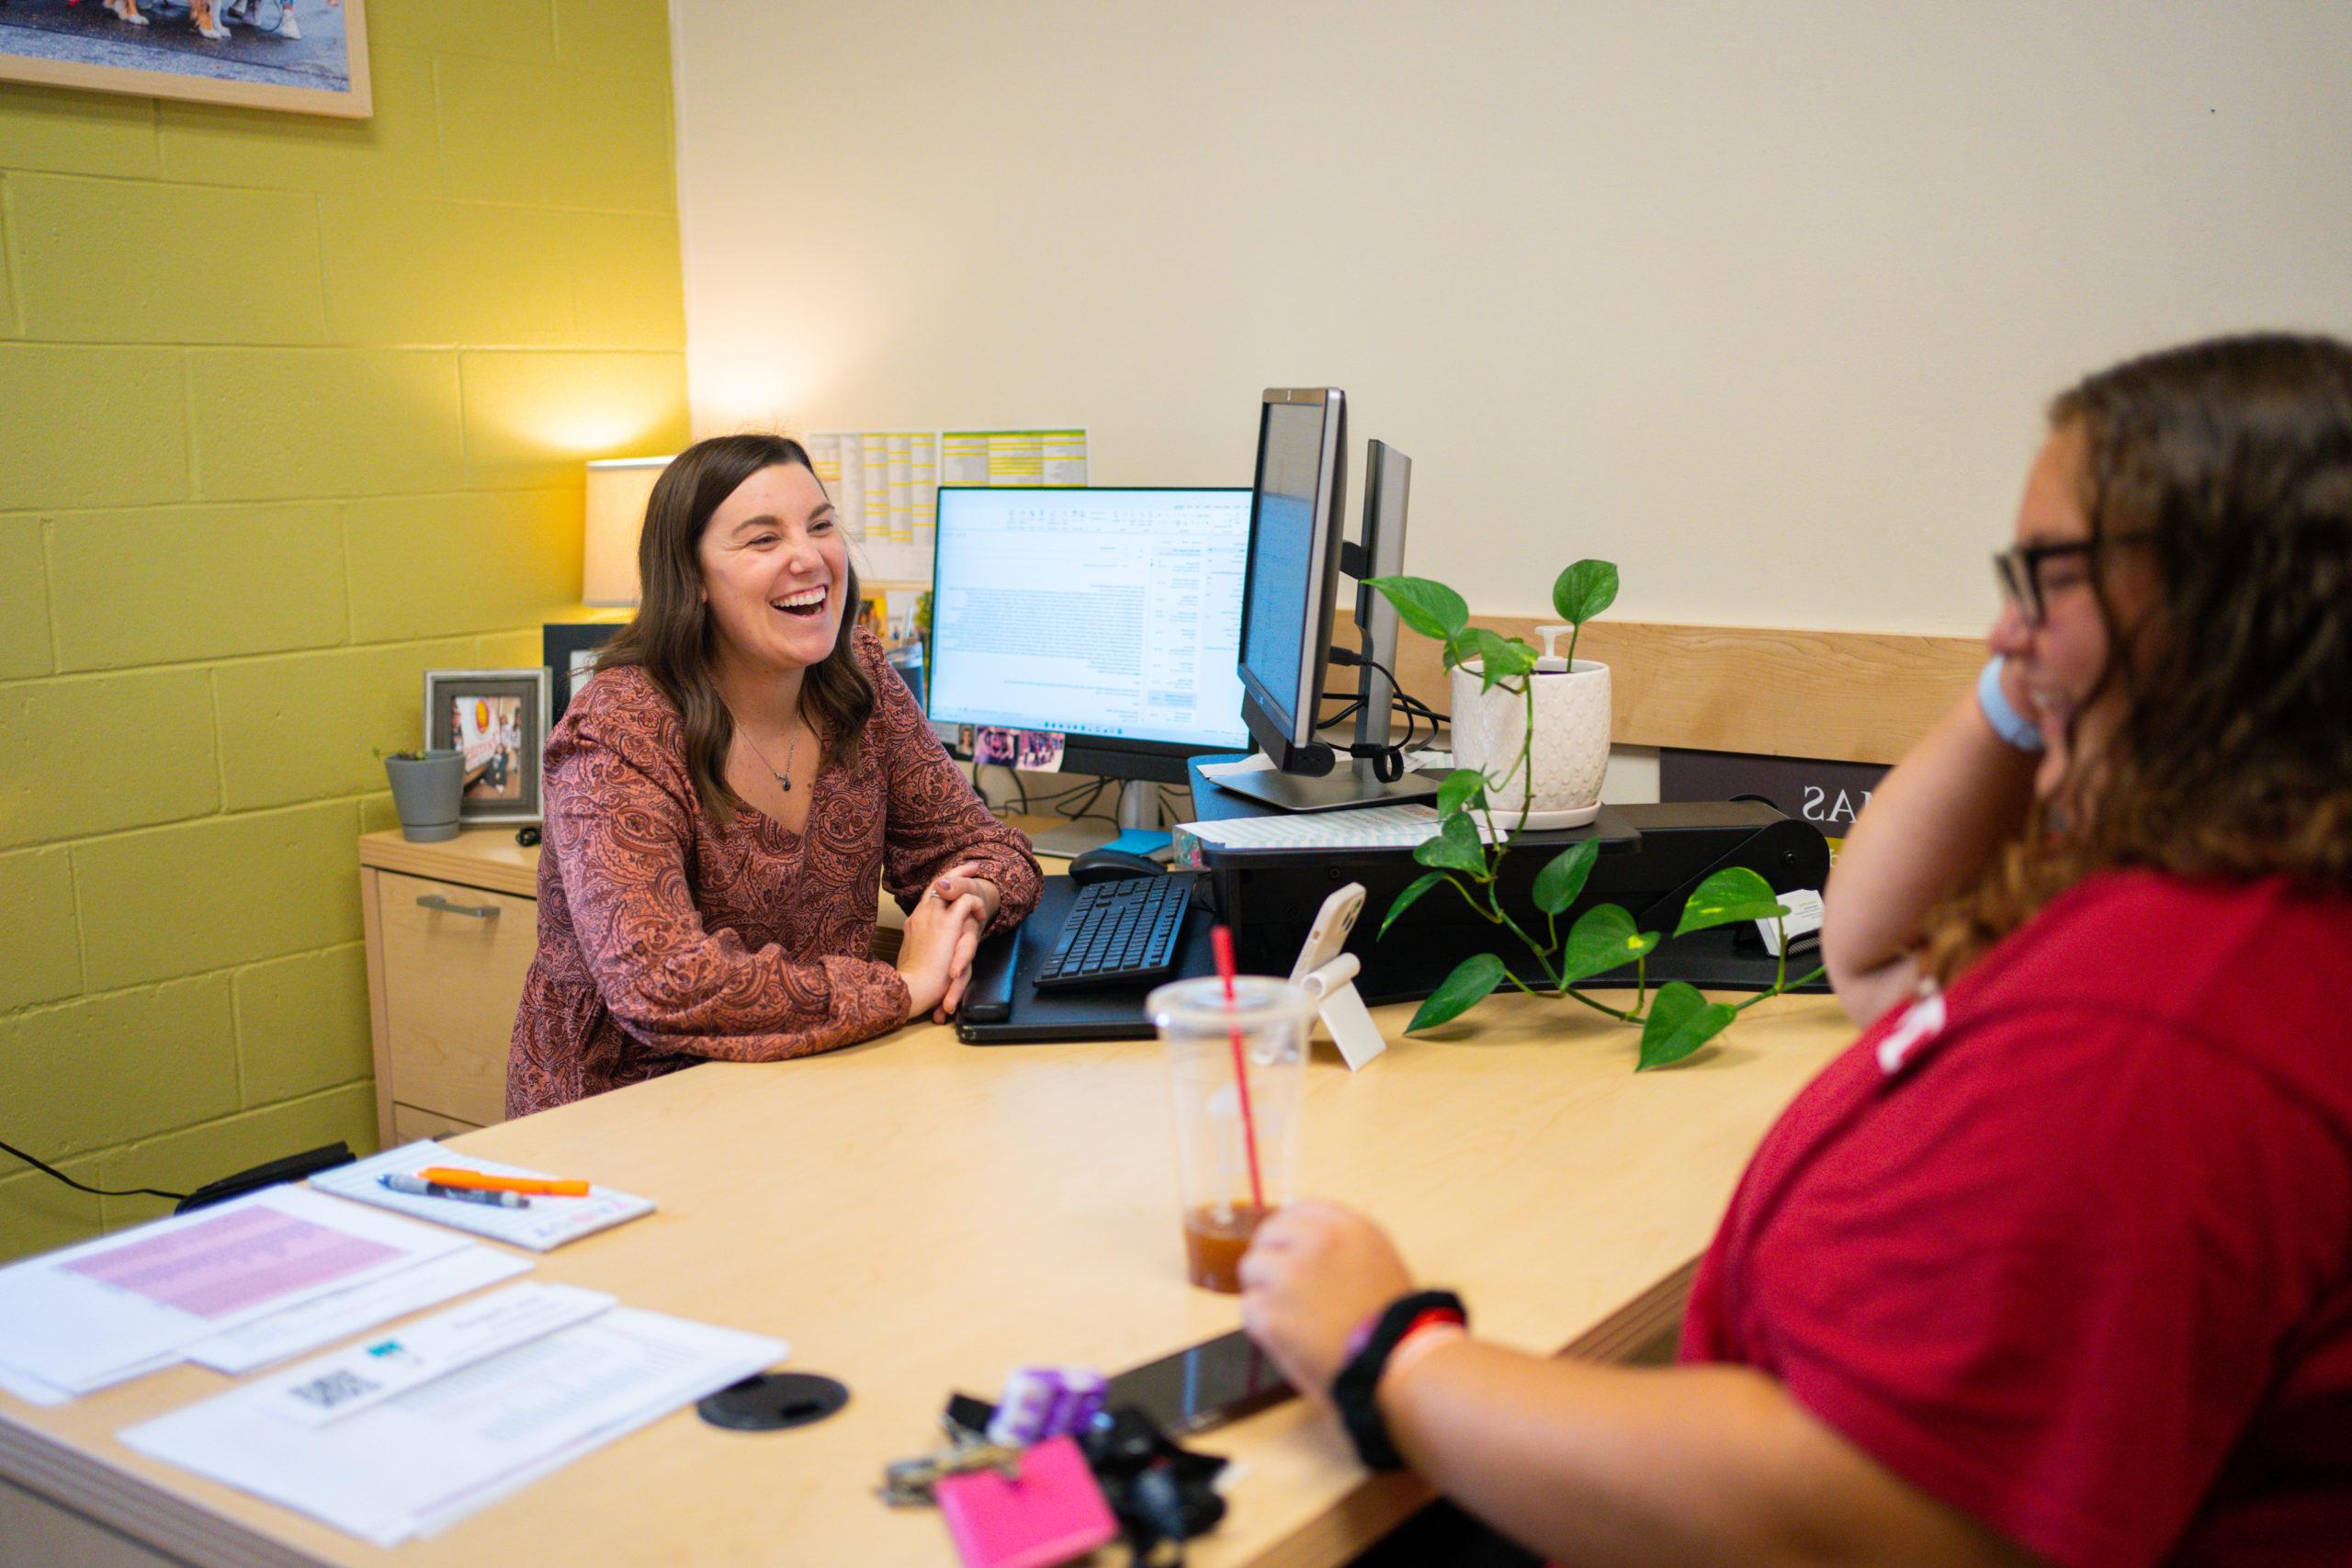 Professional and Career Development advisor meets with a student in her office